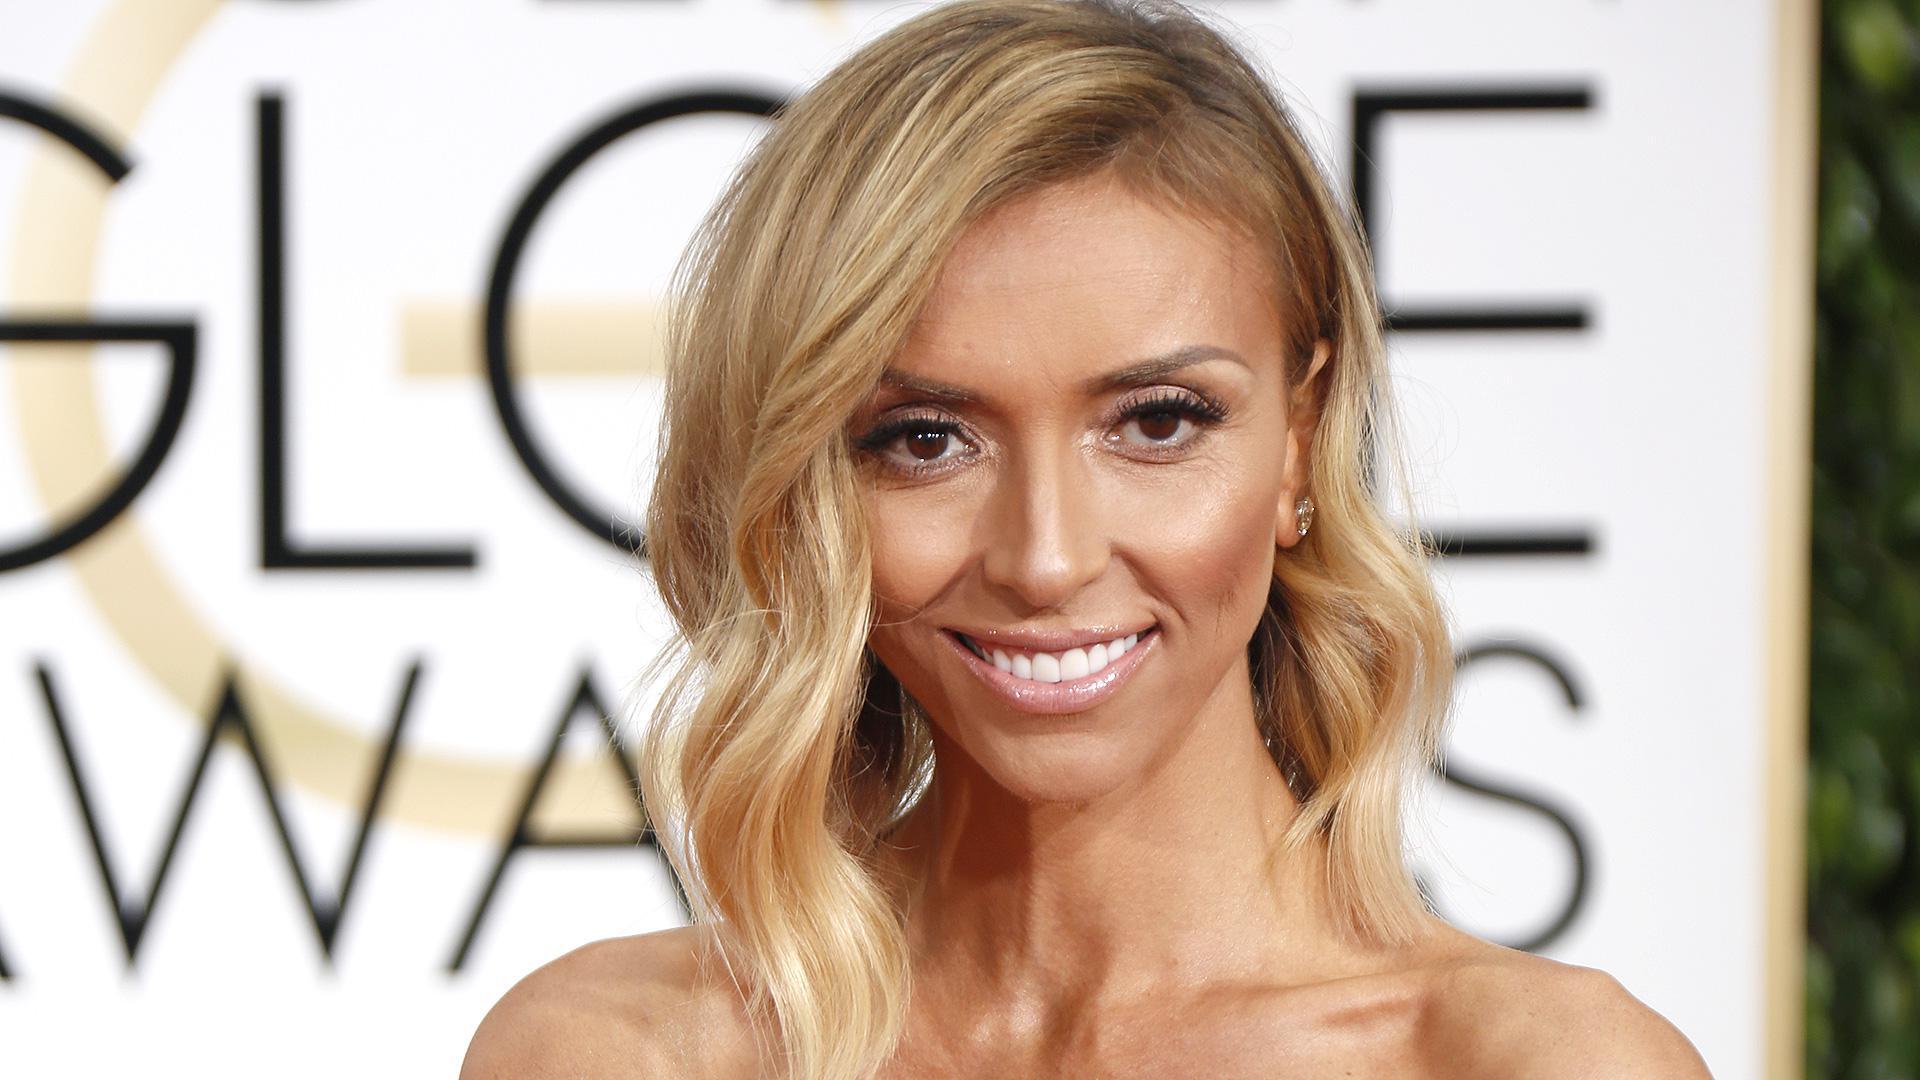 Giuliana Rancic was viciously attacked for her appearance